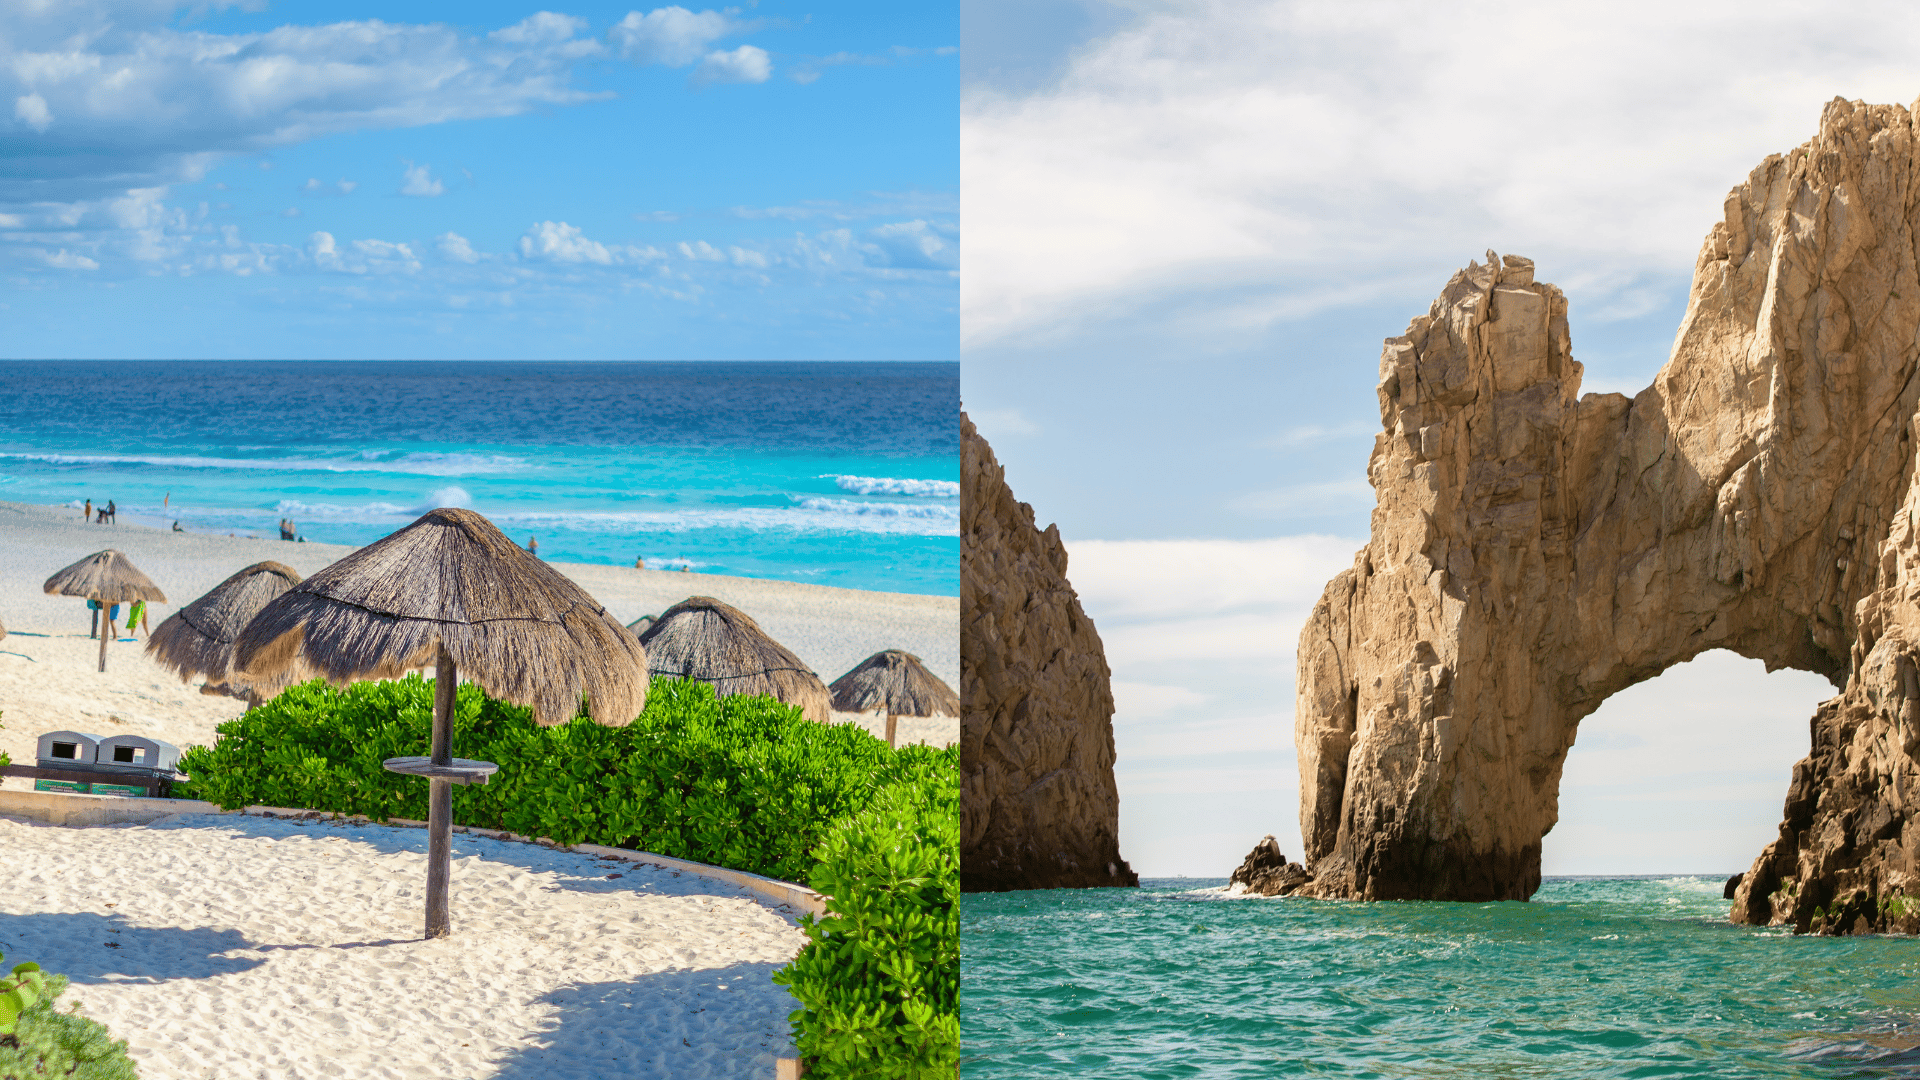 Photo of a sandy beach in Cancun next to a photo of El Arco rock formation in Cabo